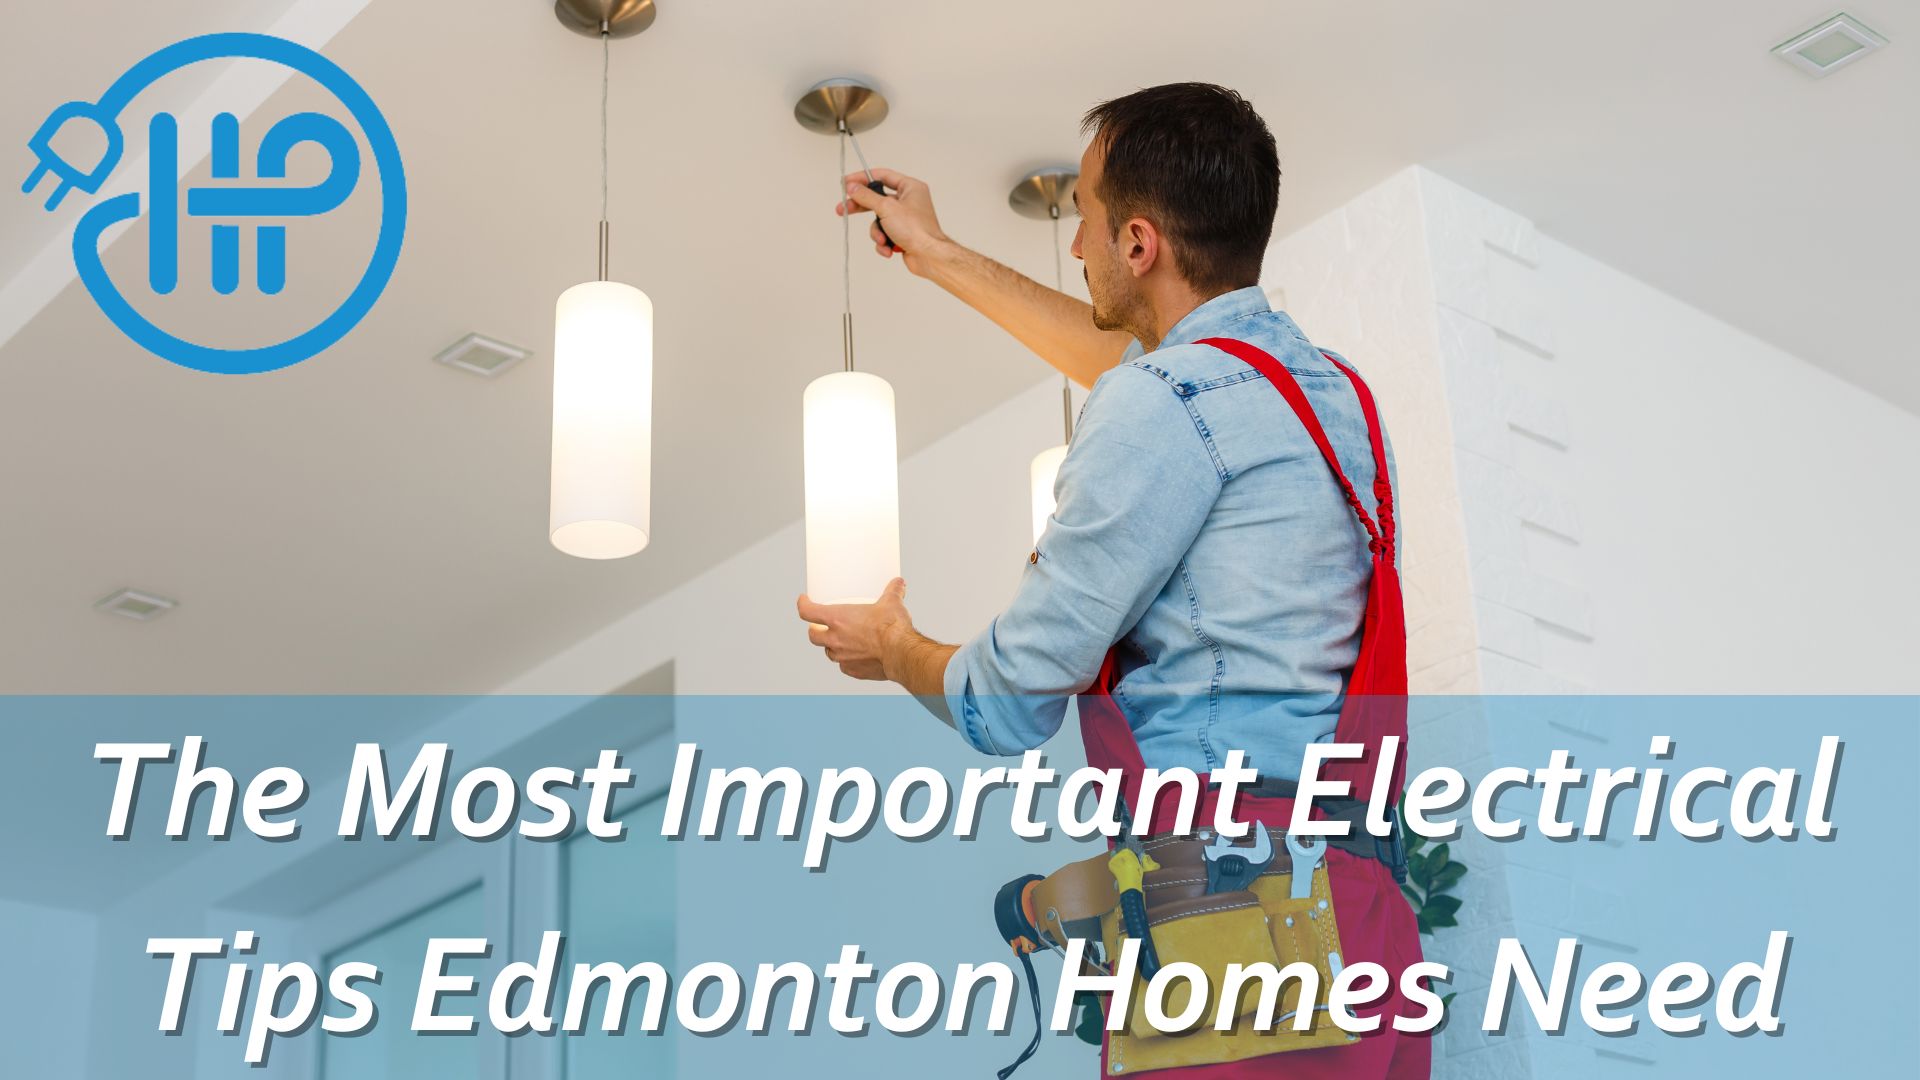 The Most Important Electrical Tips Edmonton Homes Need